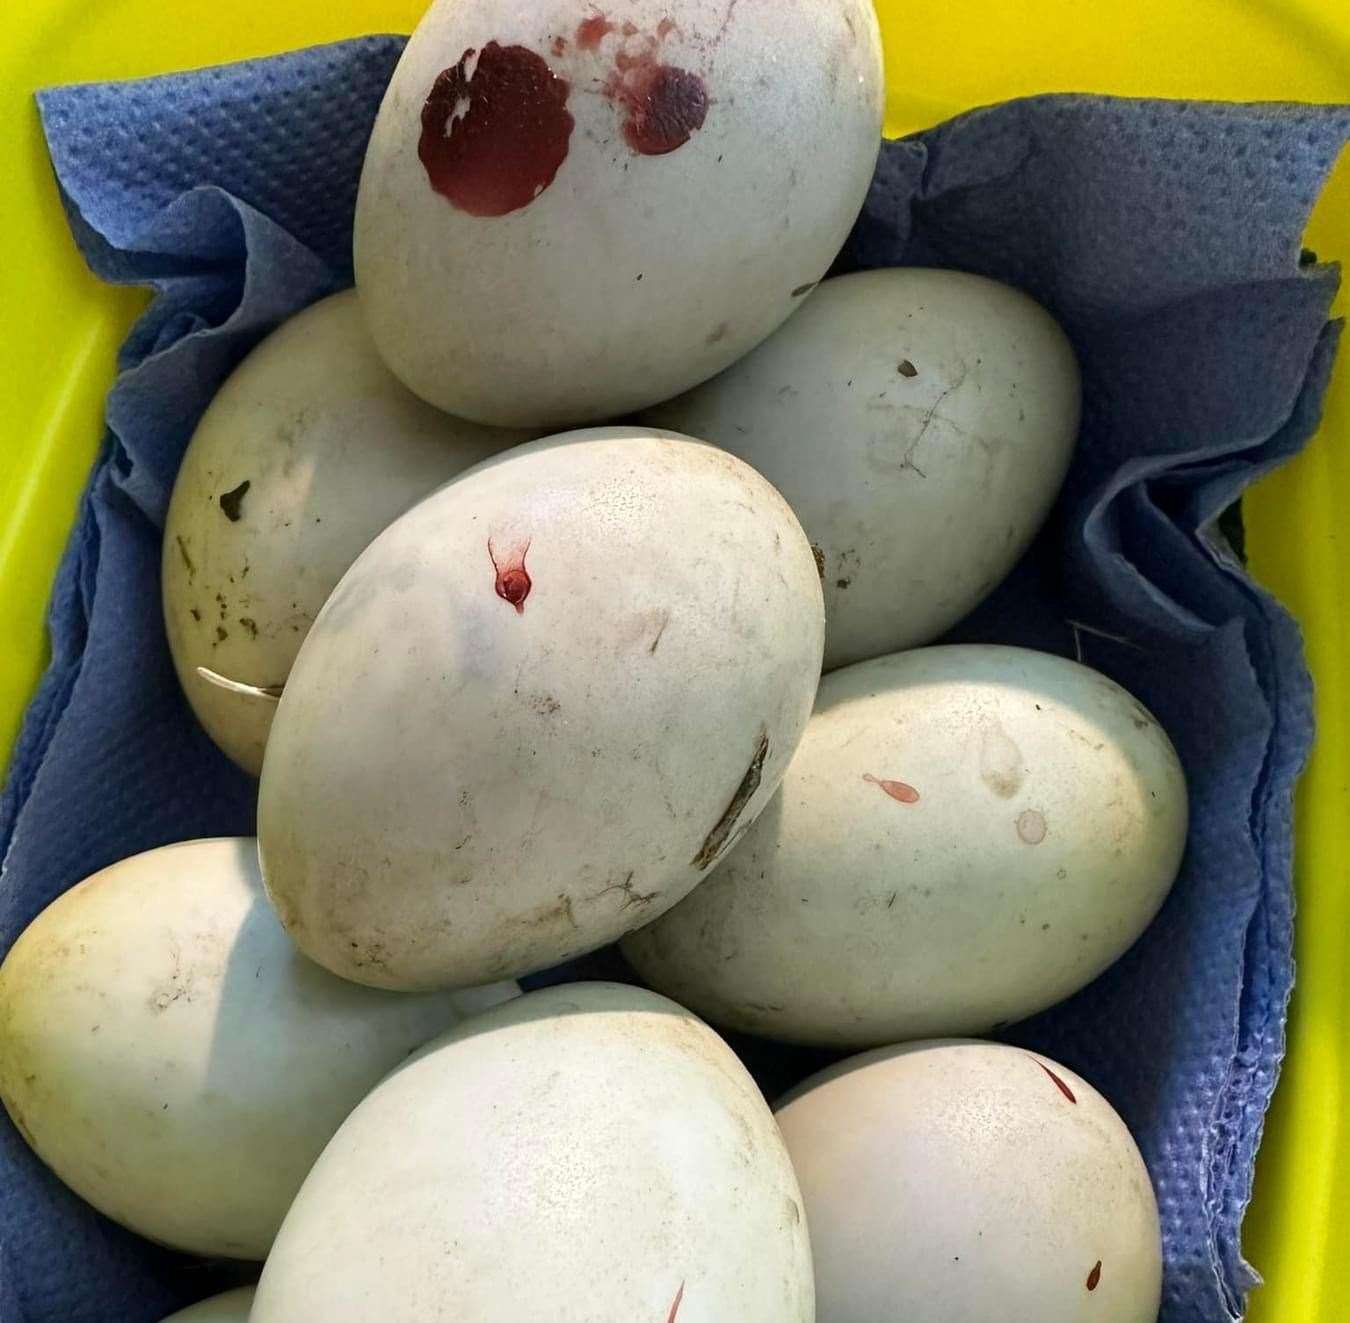 Nine eggs were found next to the dead duck. Picture: Columbines Wildlife Care